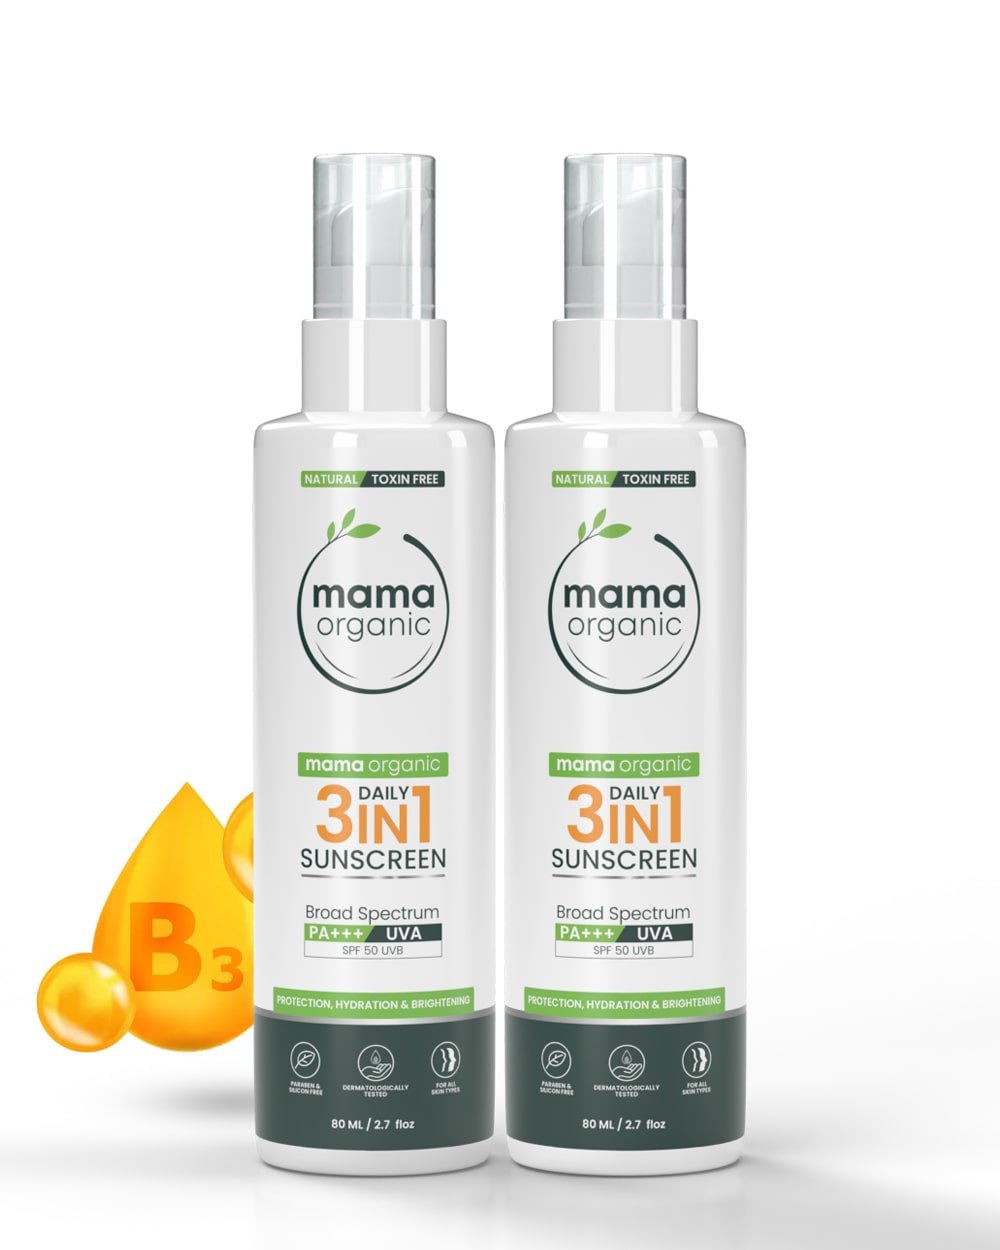 3 in 1 Daily Sunscreen 80ml Combo For Sun Protection - Natural & Toxin-Free - MamaOrganic